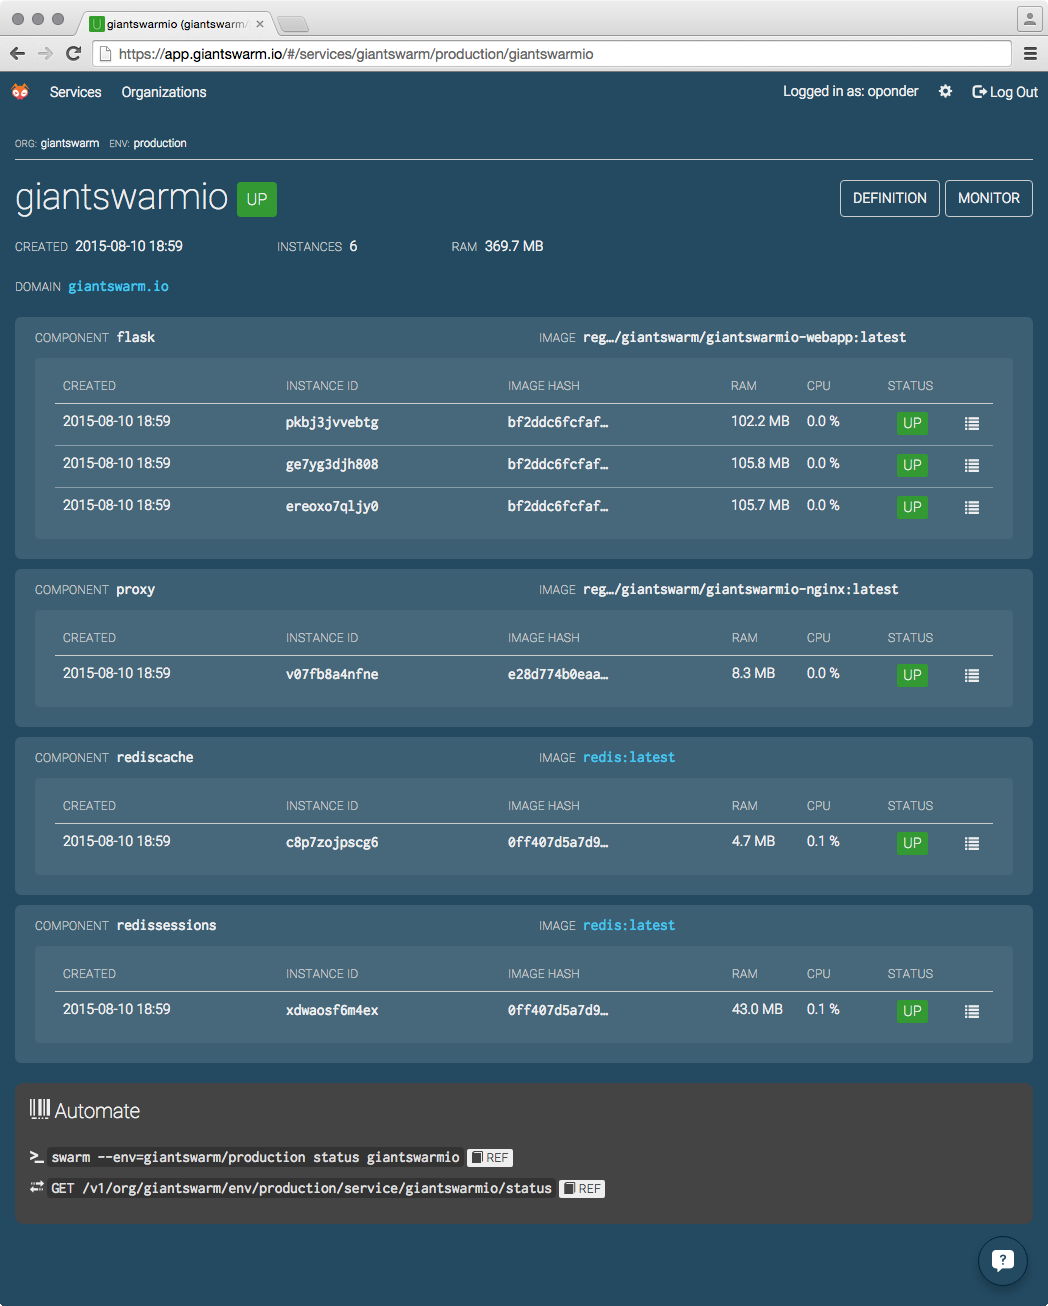 Screenshot of the Service Detail Page